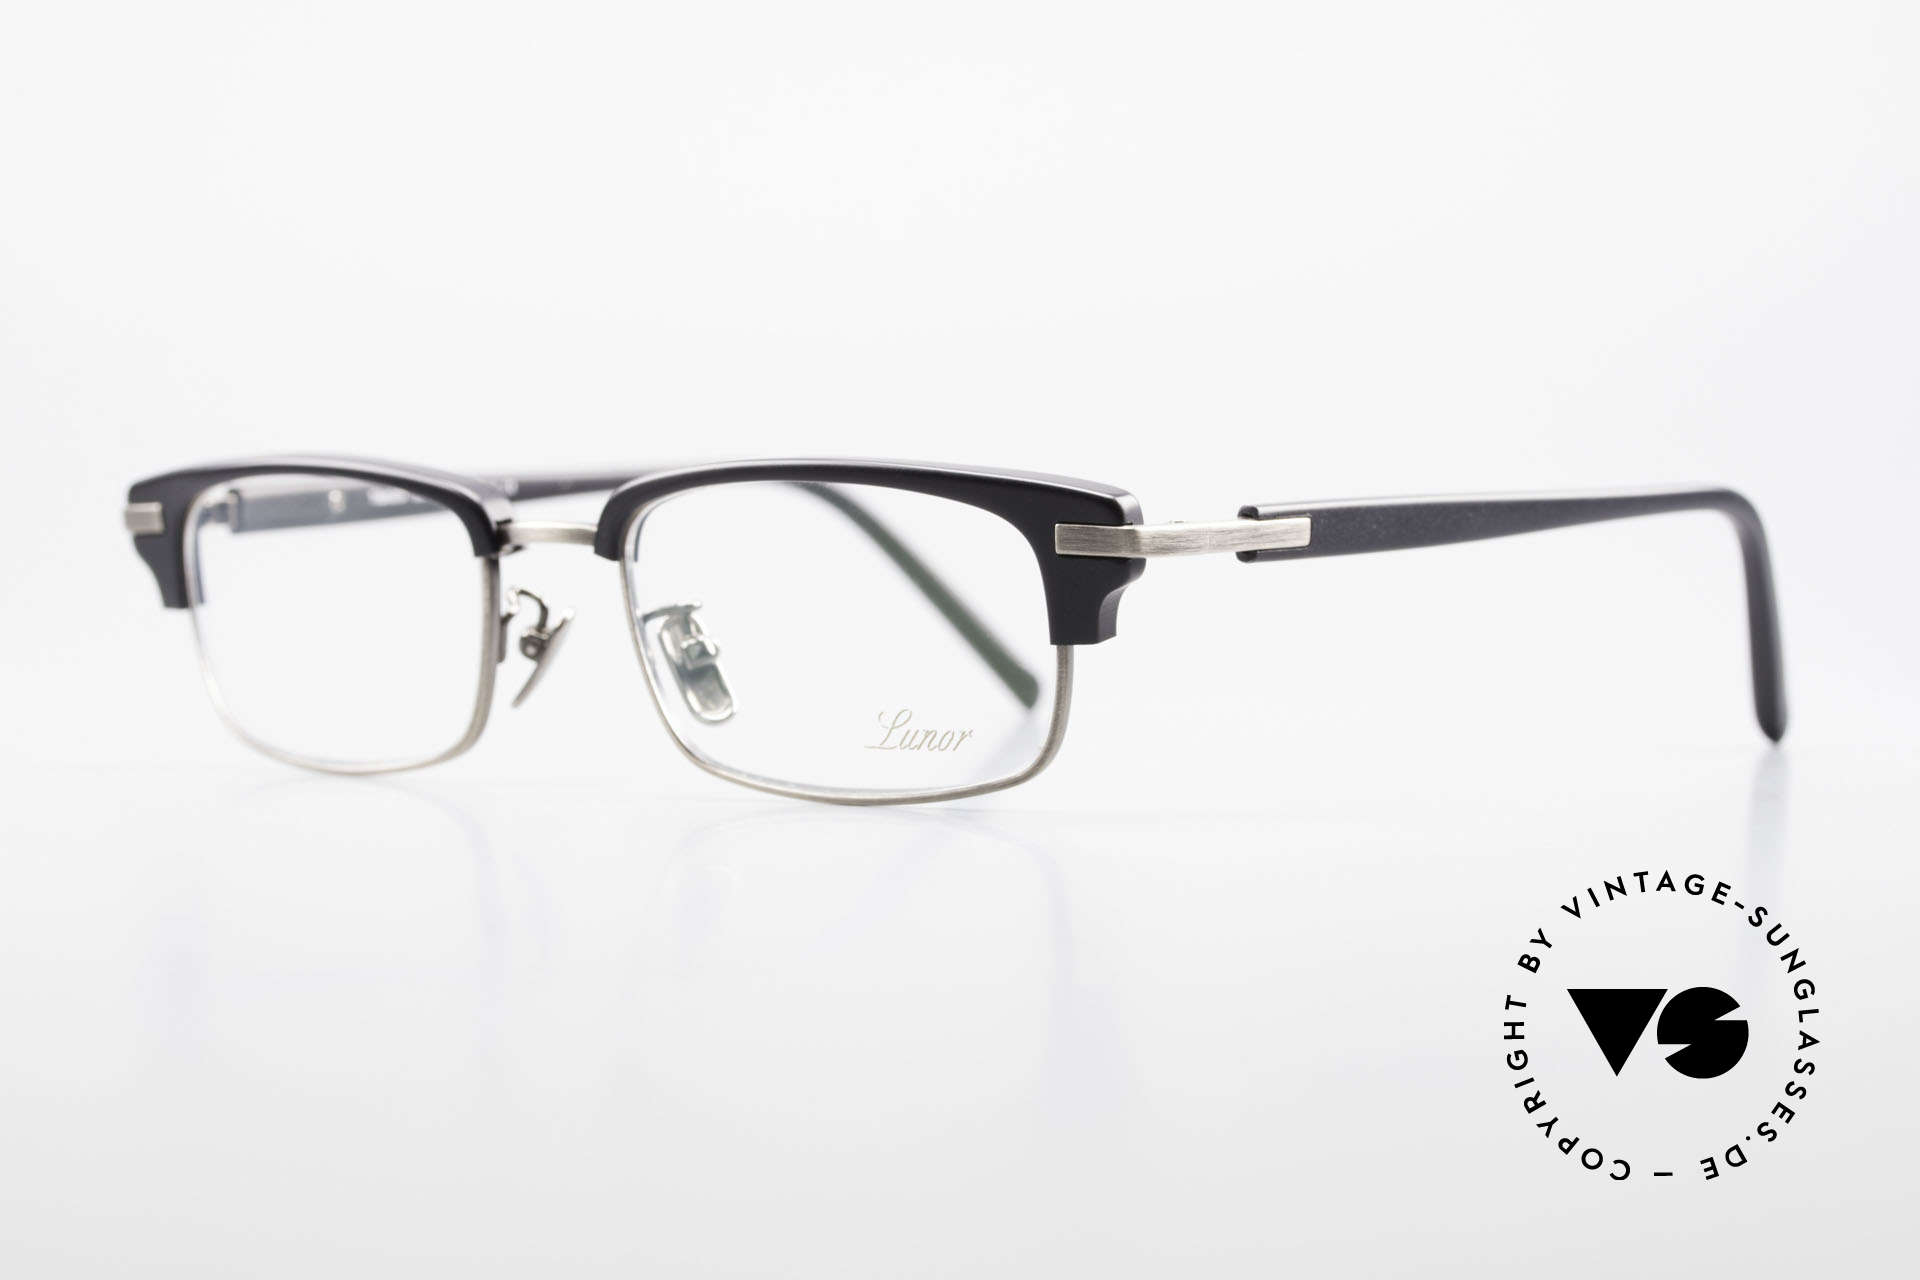 Lunor Combi II Mod 80 Combi Titanium Eyeglasses, Lunor: shortcut for French "Lunette d'Or" (gold glasses), Made for Men and Women